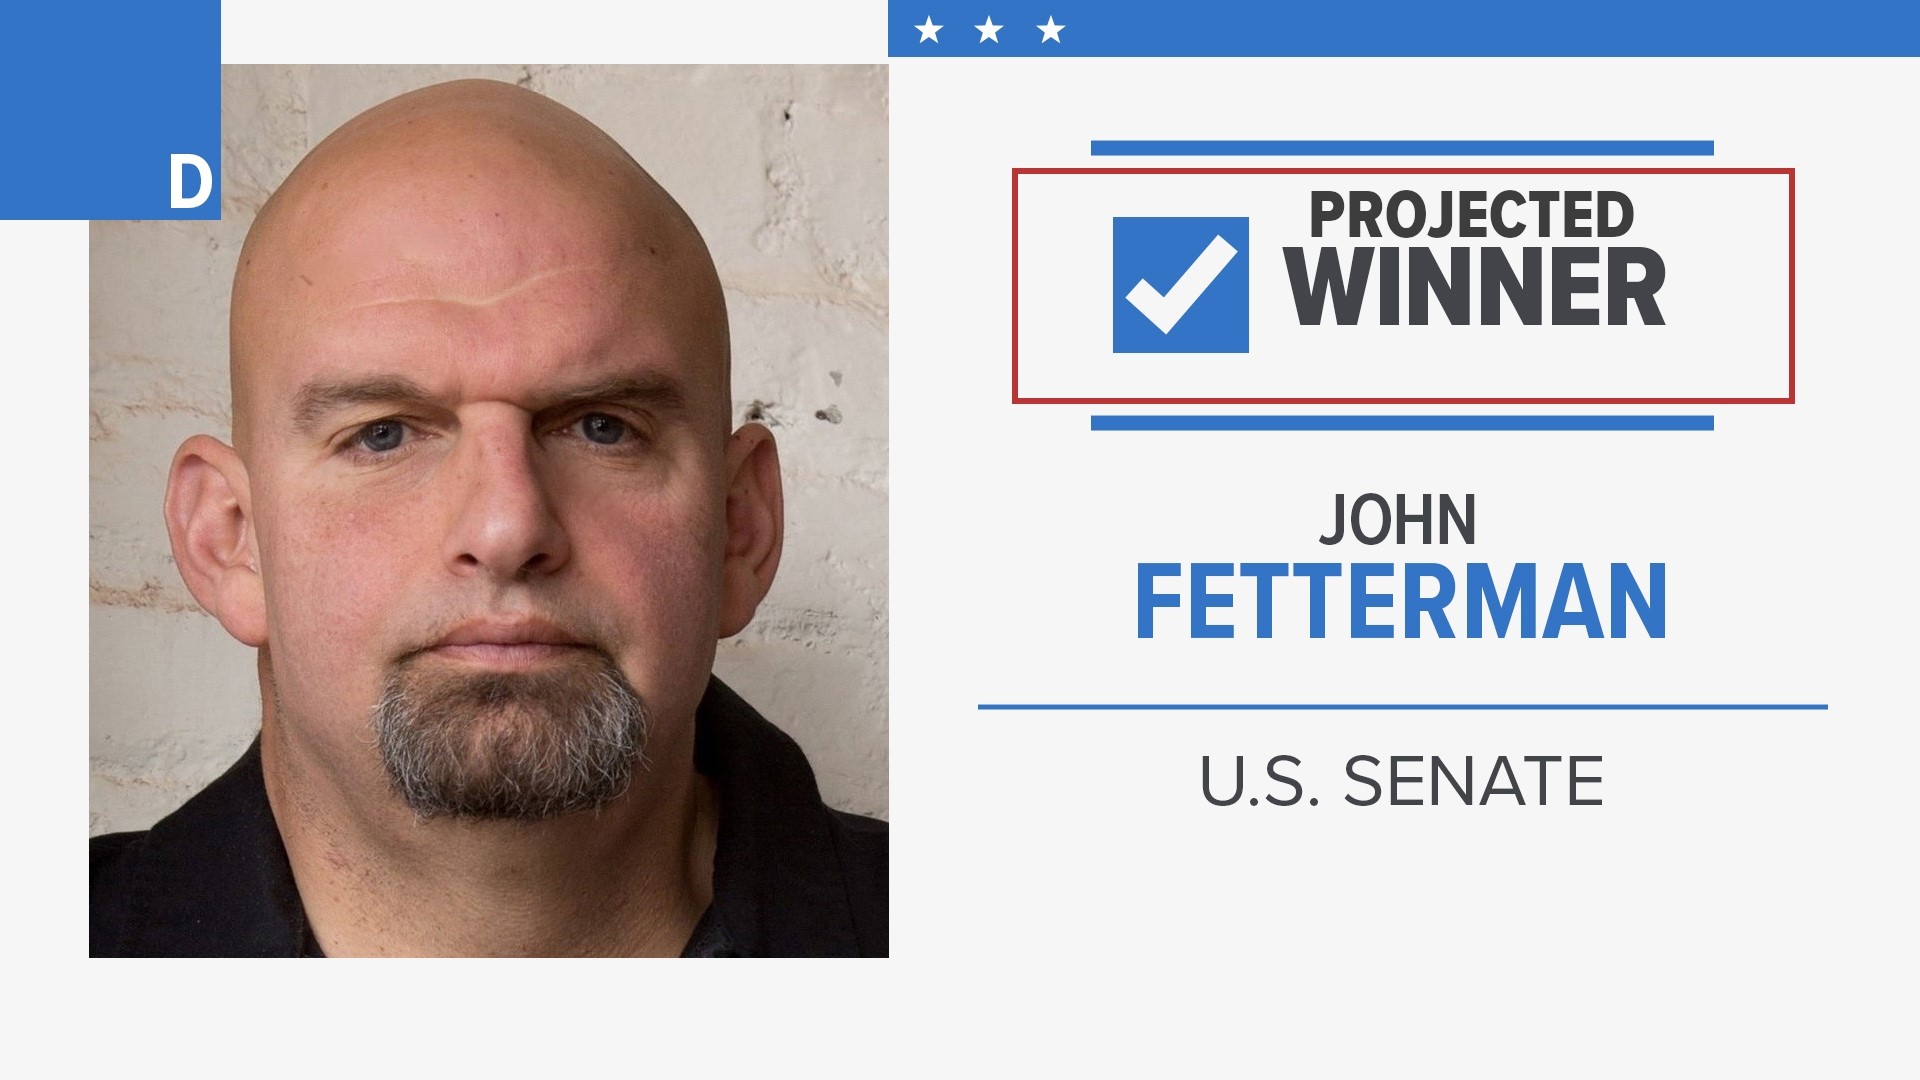 John Fetterman (D) has been projected to be victorious over Mehmet Oz (R).